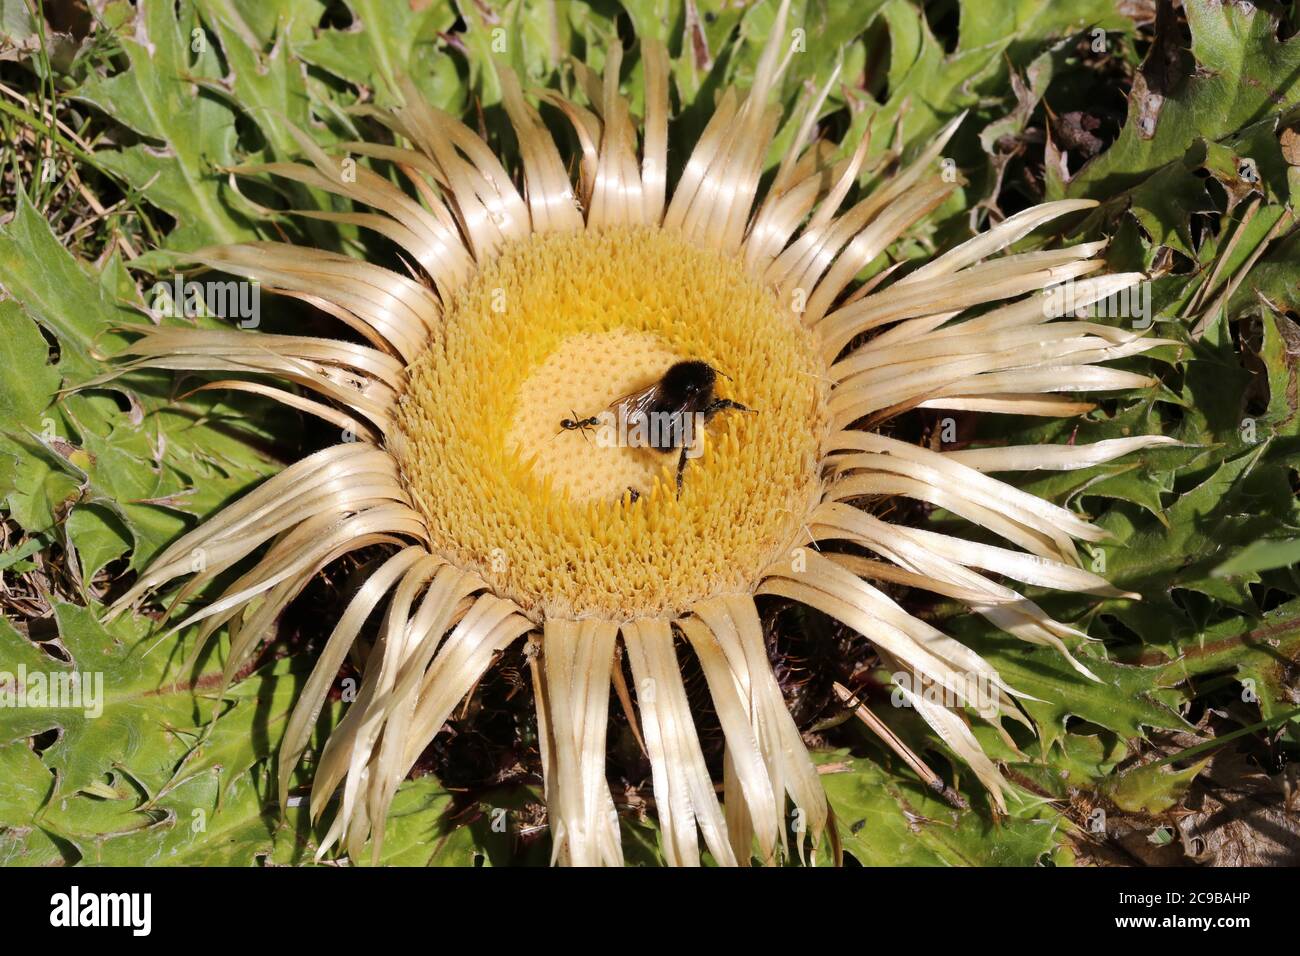 Carlina acanthifolia, Acanthus-Leaved, Carline Thistle. Wild plant shot in summer. Stock Photo